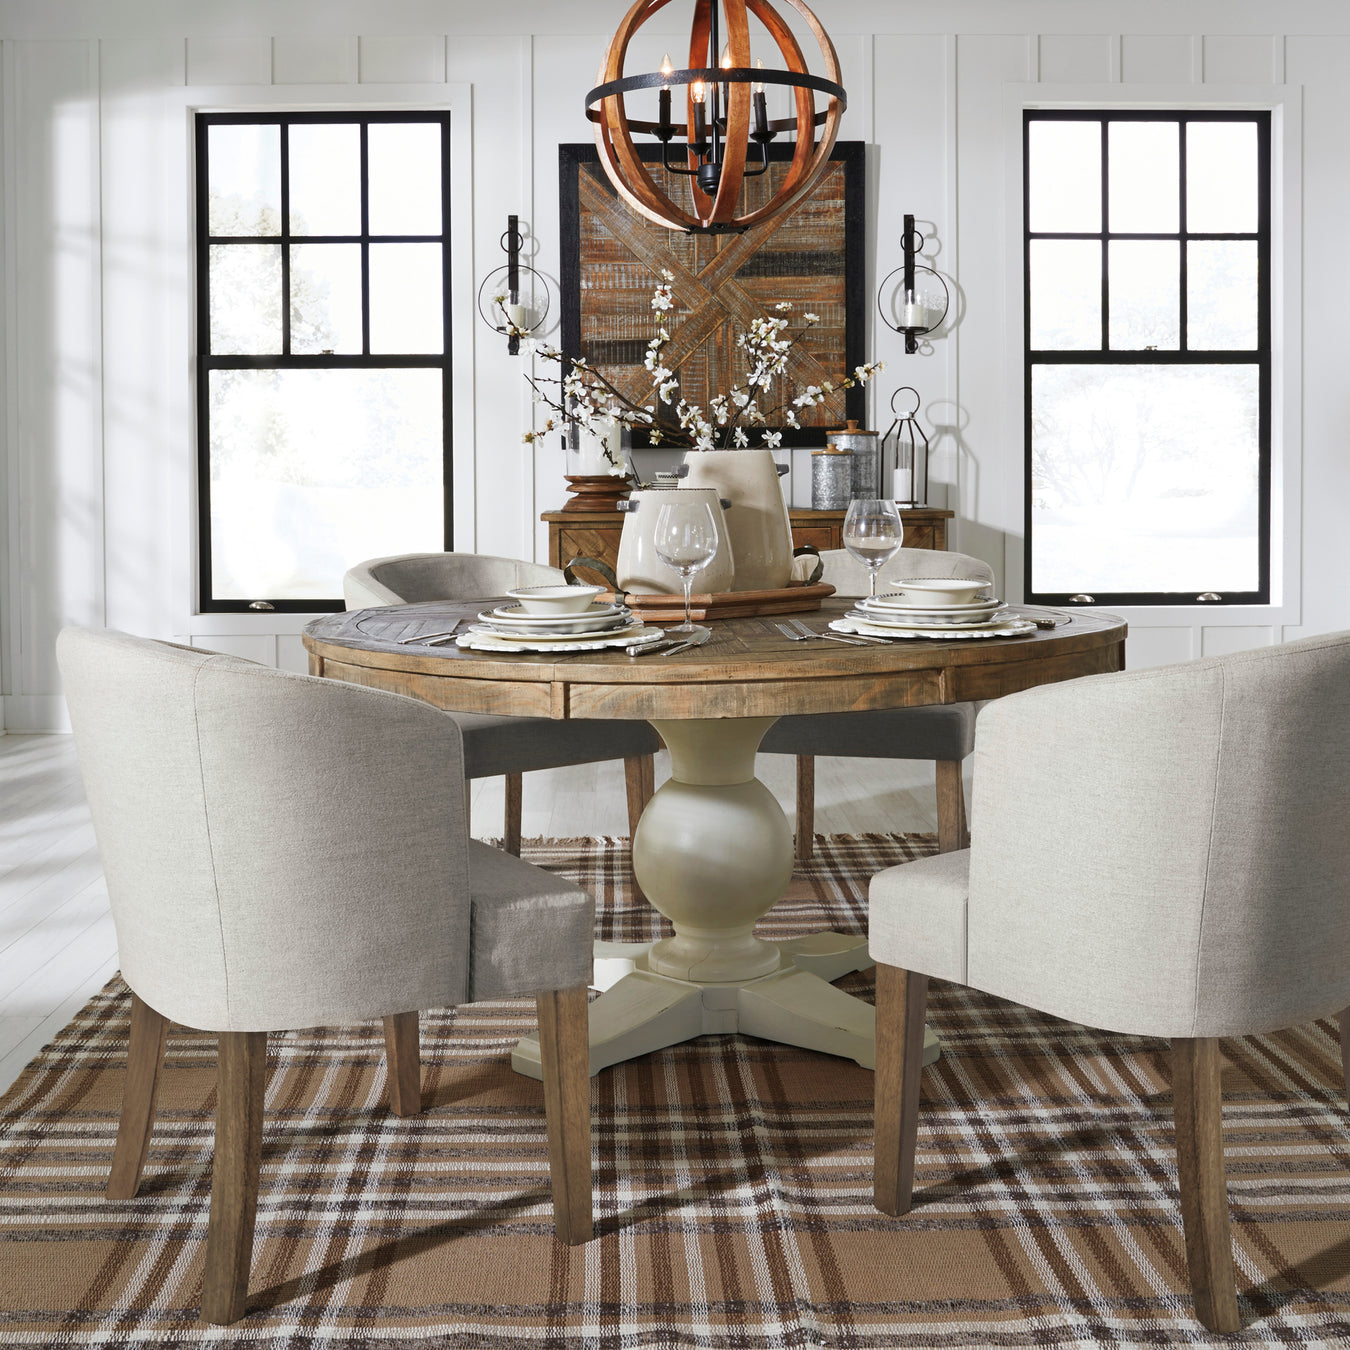 Shop Dining Room Table Sets at JR Furniture Store in Fayetteville, NC 28311